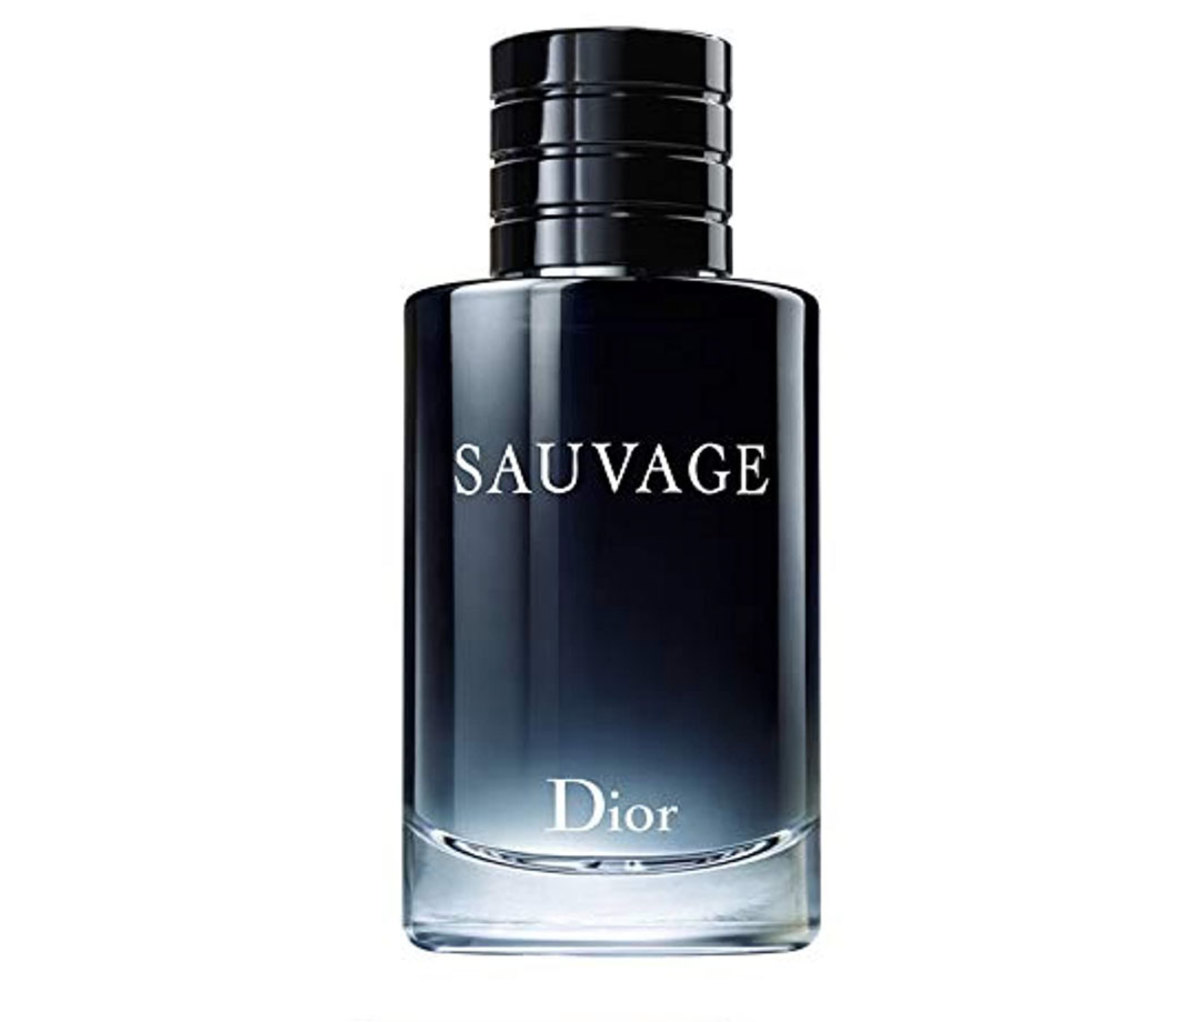 18 Best Men's Colognes of 2023 - How to Choose the Right Cologne